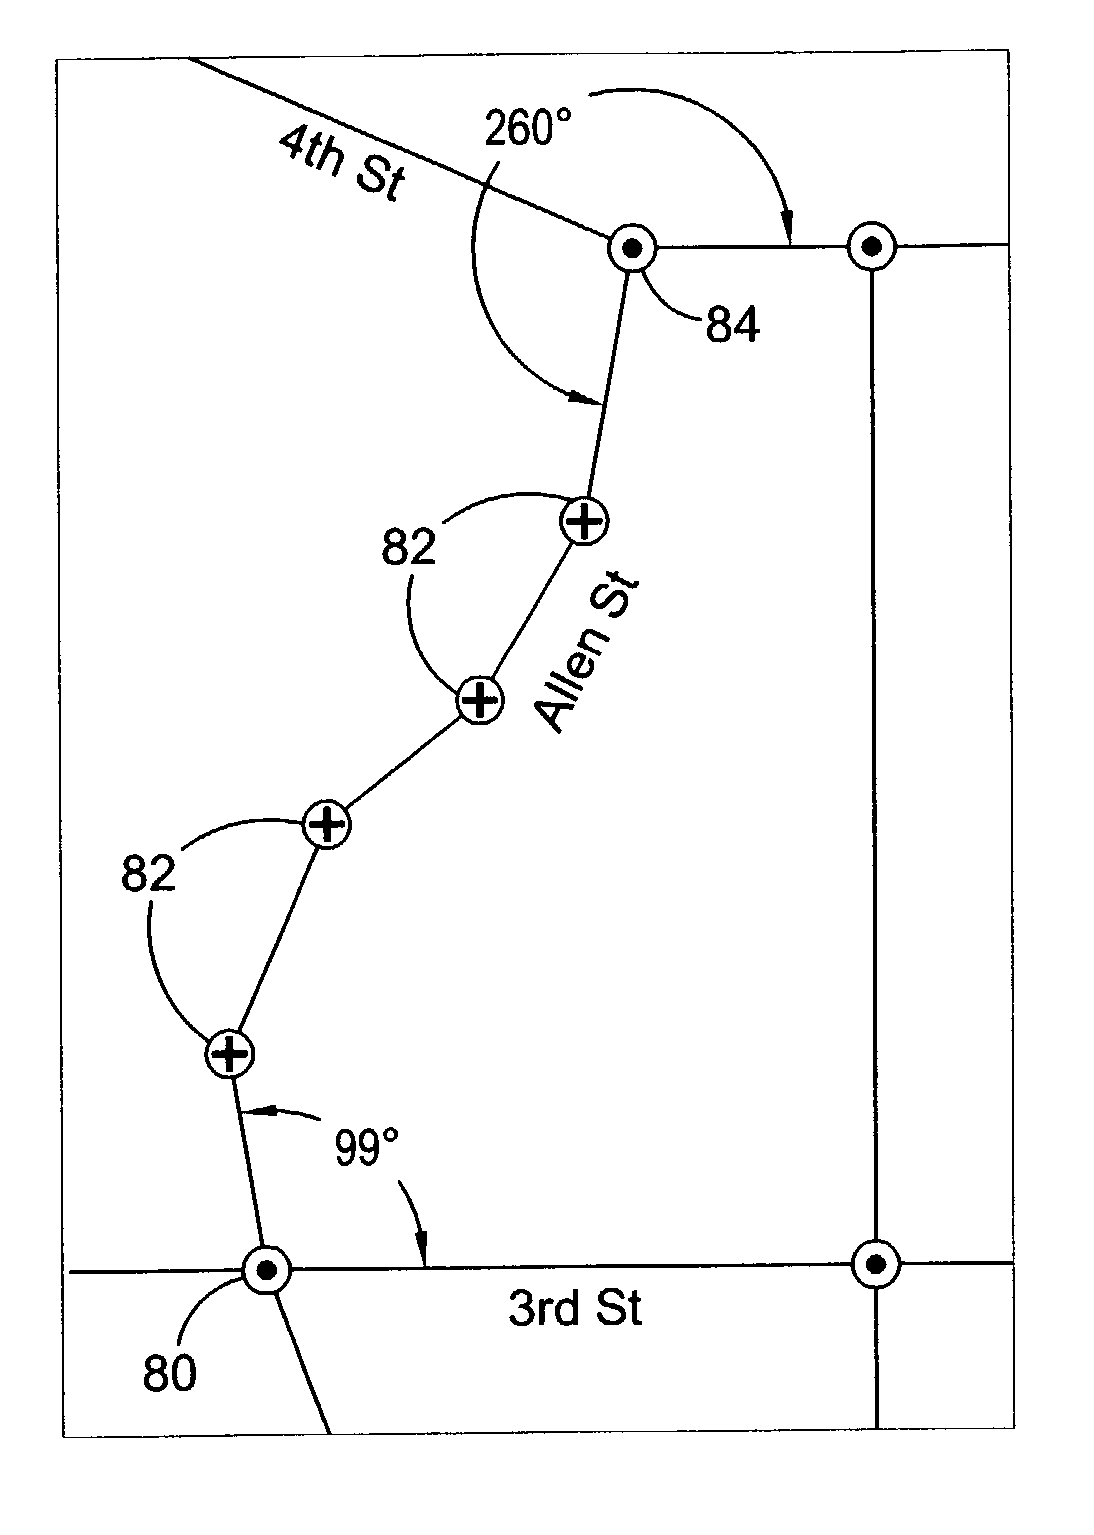 Method, apparatus, and computer program product for providing a graphical user interface with a linear map component